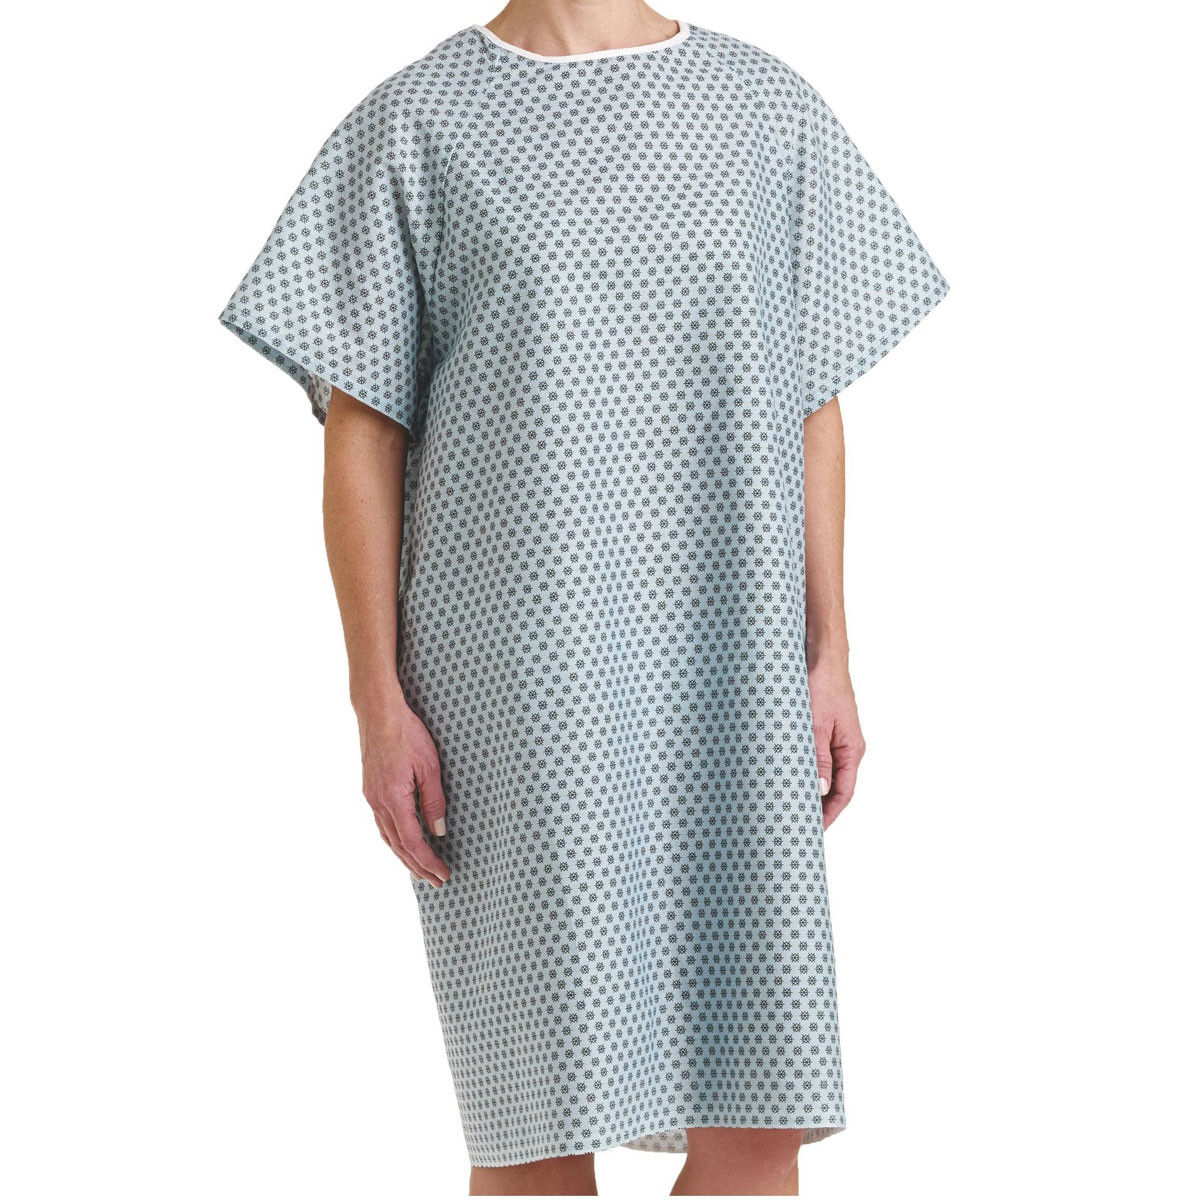 What feature does this hospital gown have for convenient dressing and undressing?